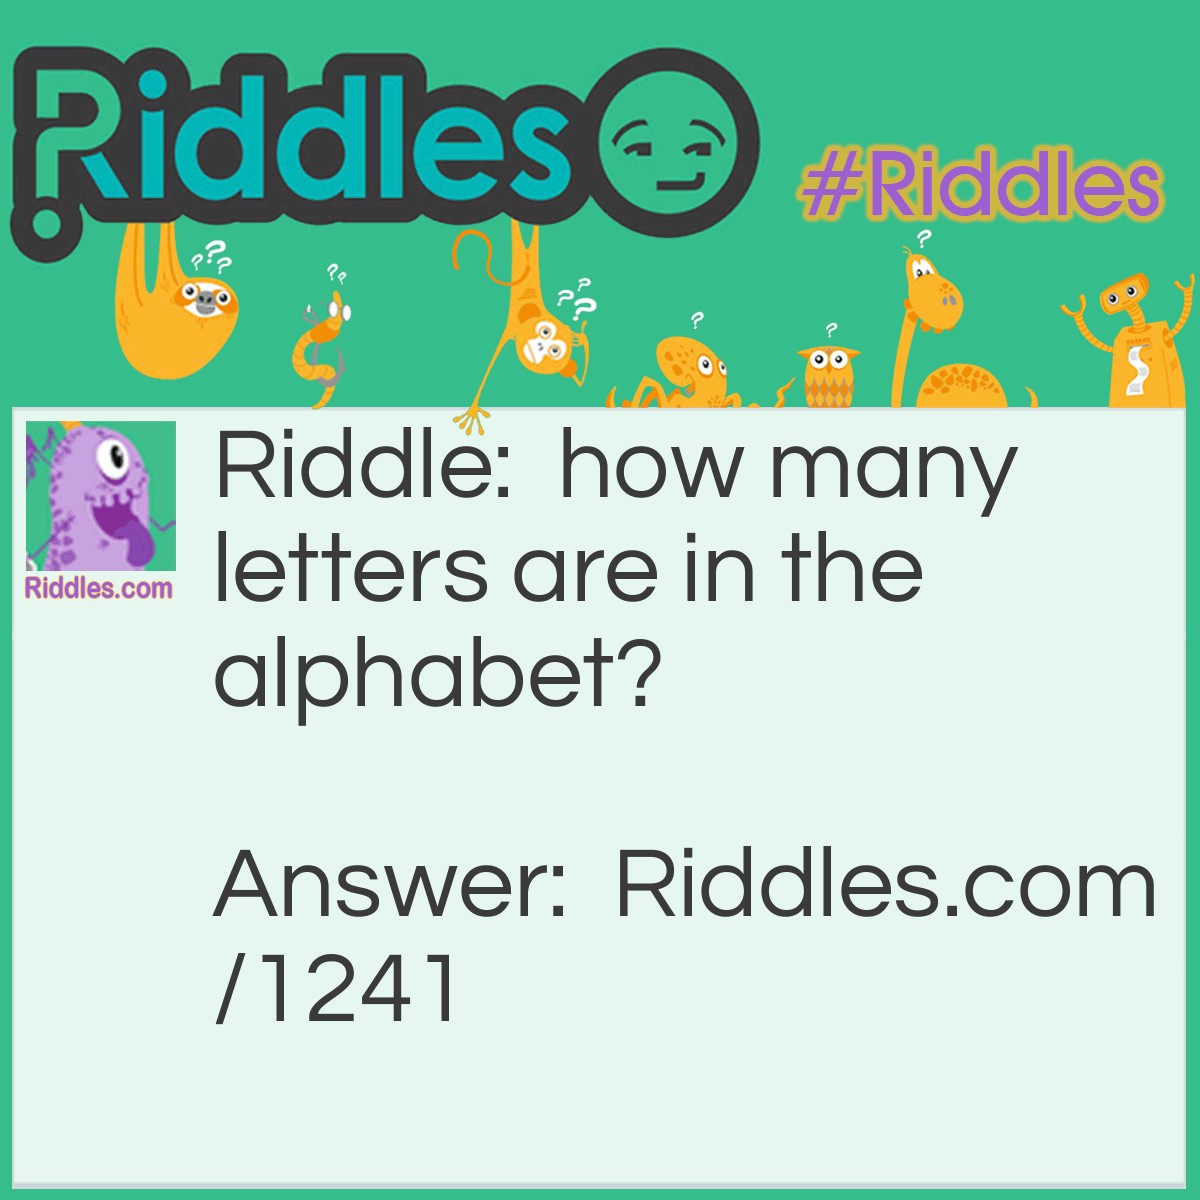 Riddle: How many letters are in the alphabet? Answer: 11 (t-h-e- a-l-p-h-a-b-e-t)